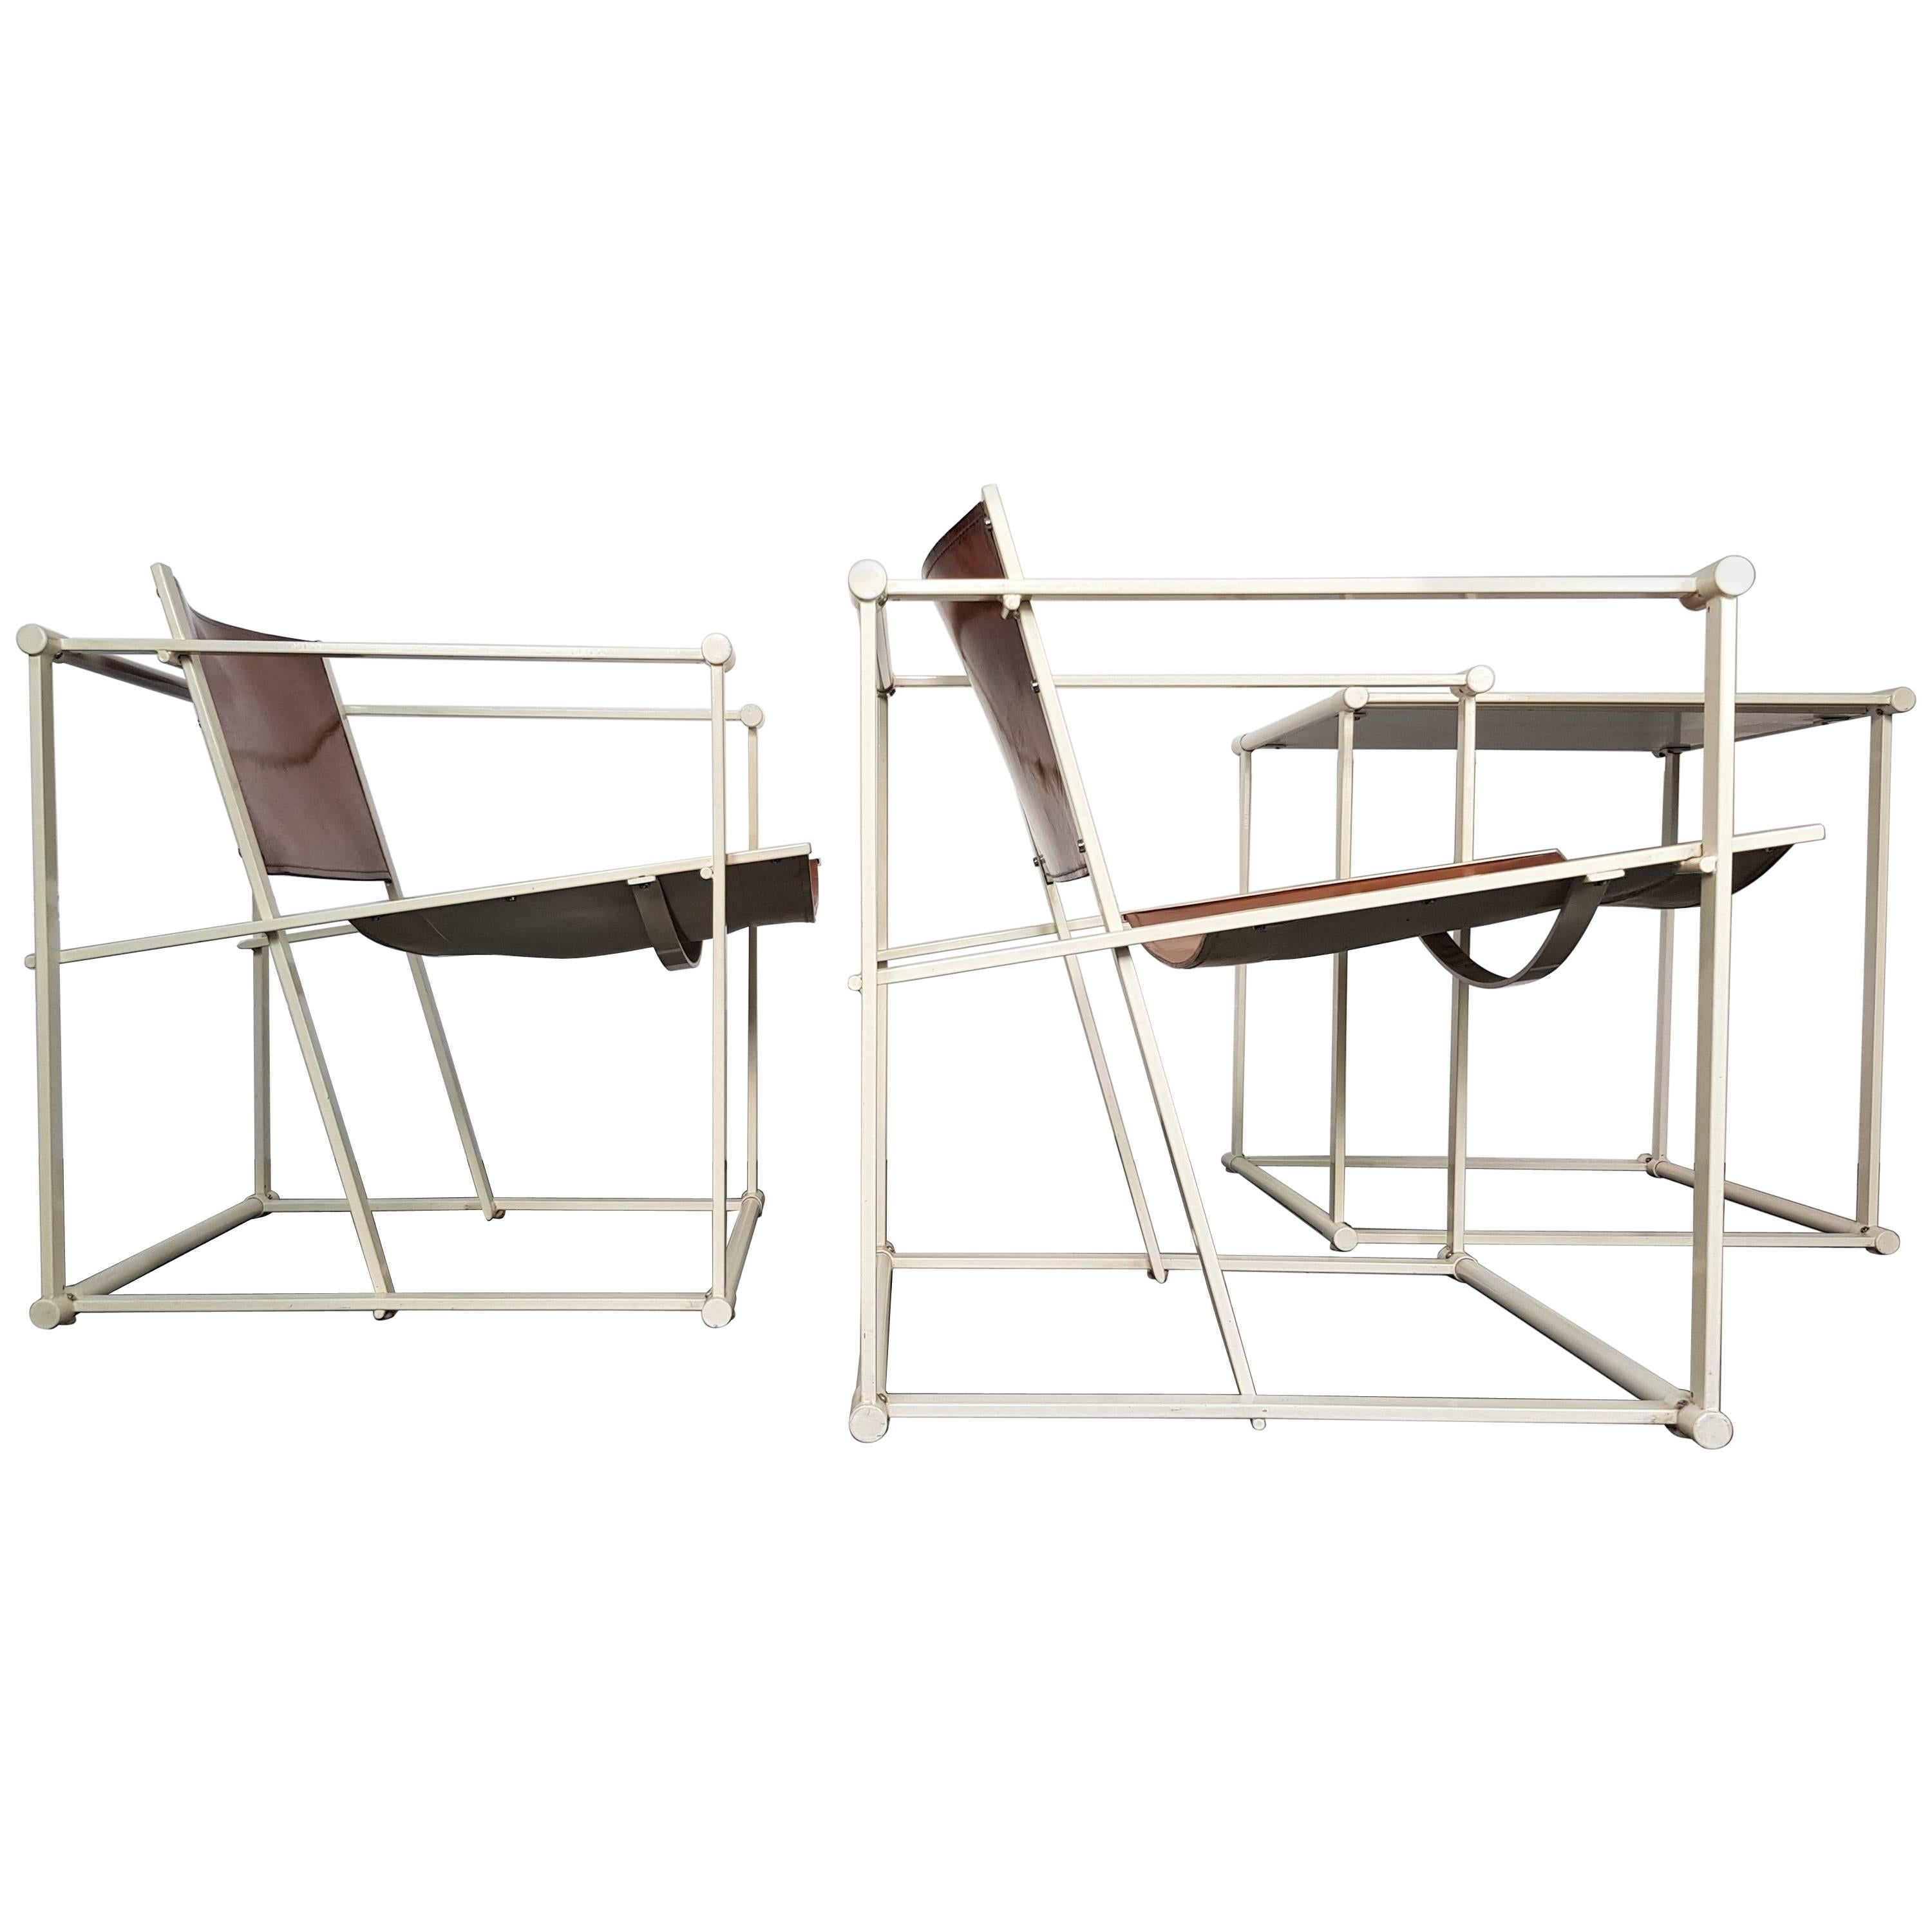 Pair of FM62 Chairs and Side Table by Radboud Van Beekum for Pastoe